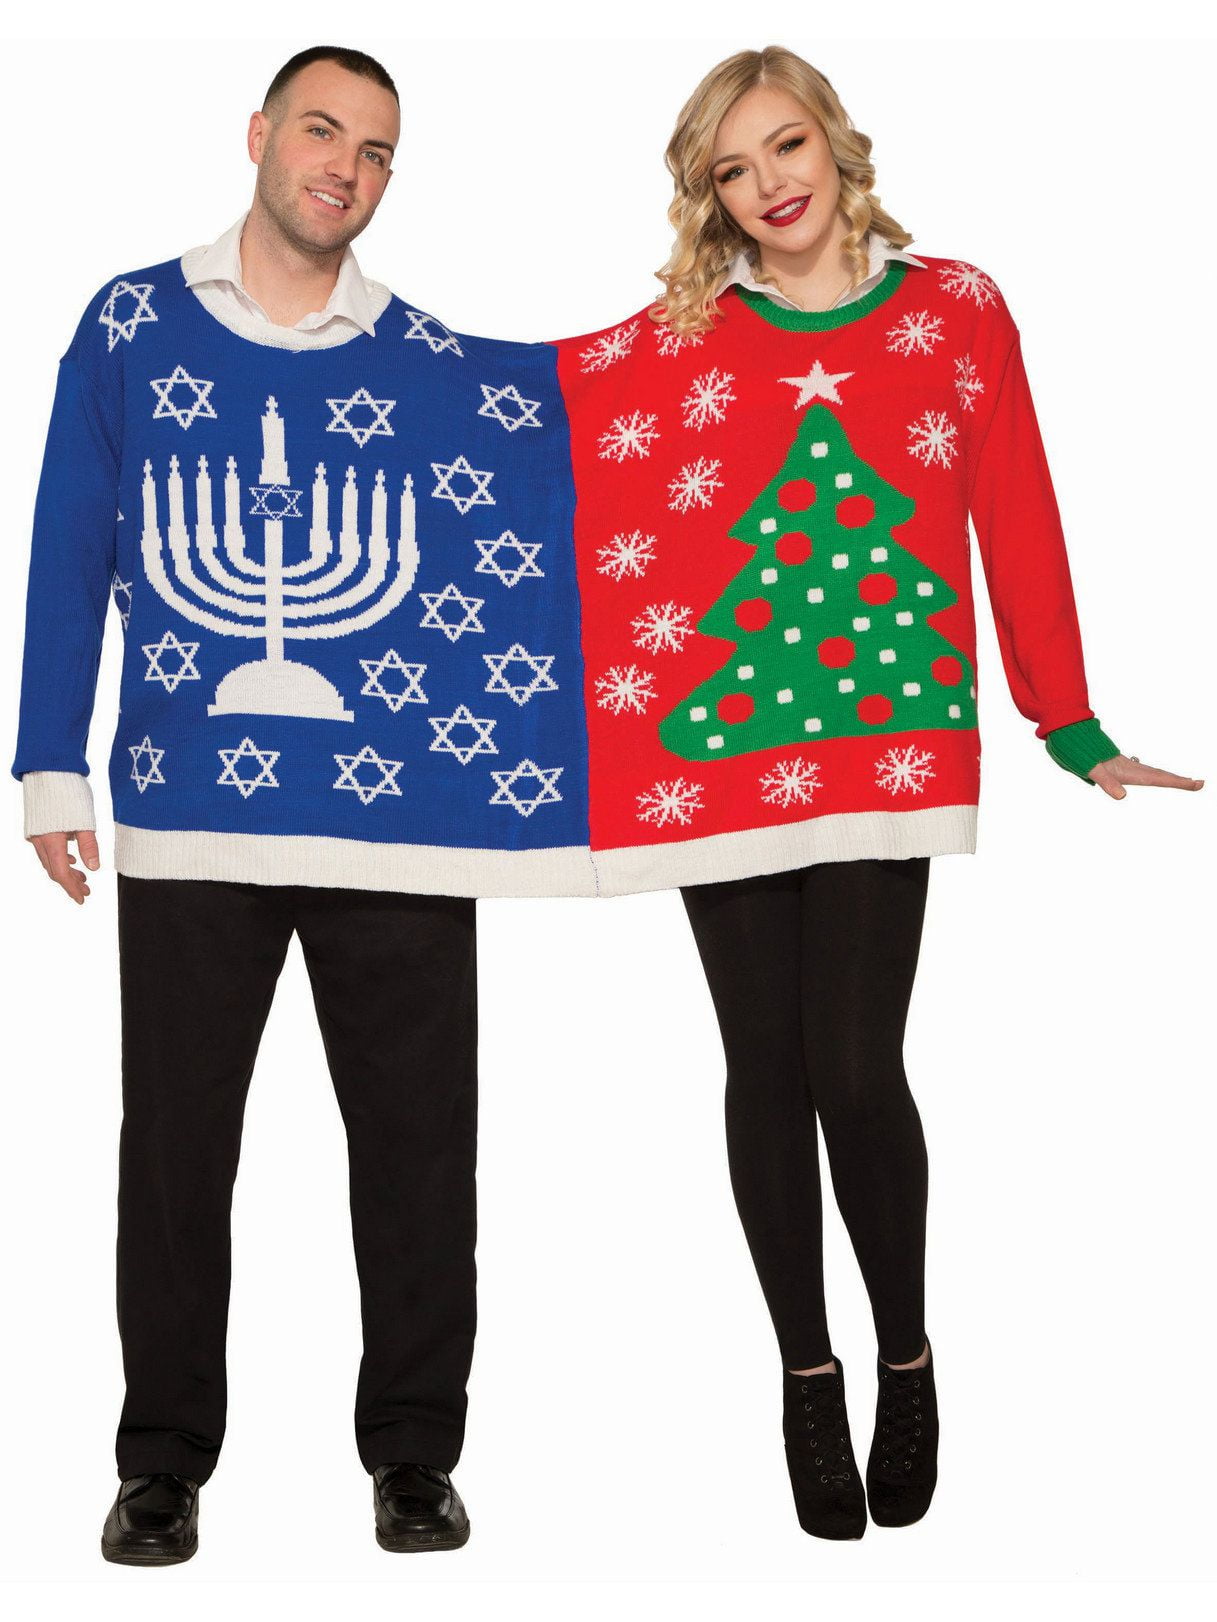 interview beat Lover Christmas for Two Christmas/Chanukah Sweater - Walmart.com